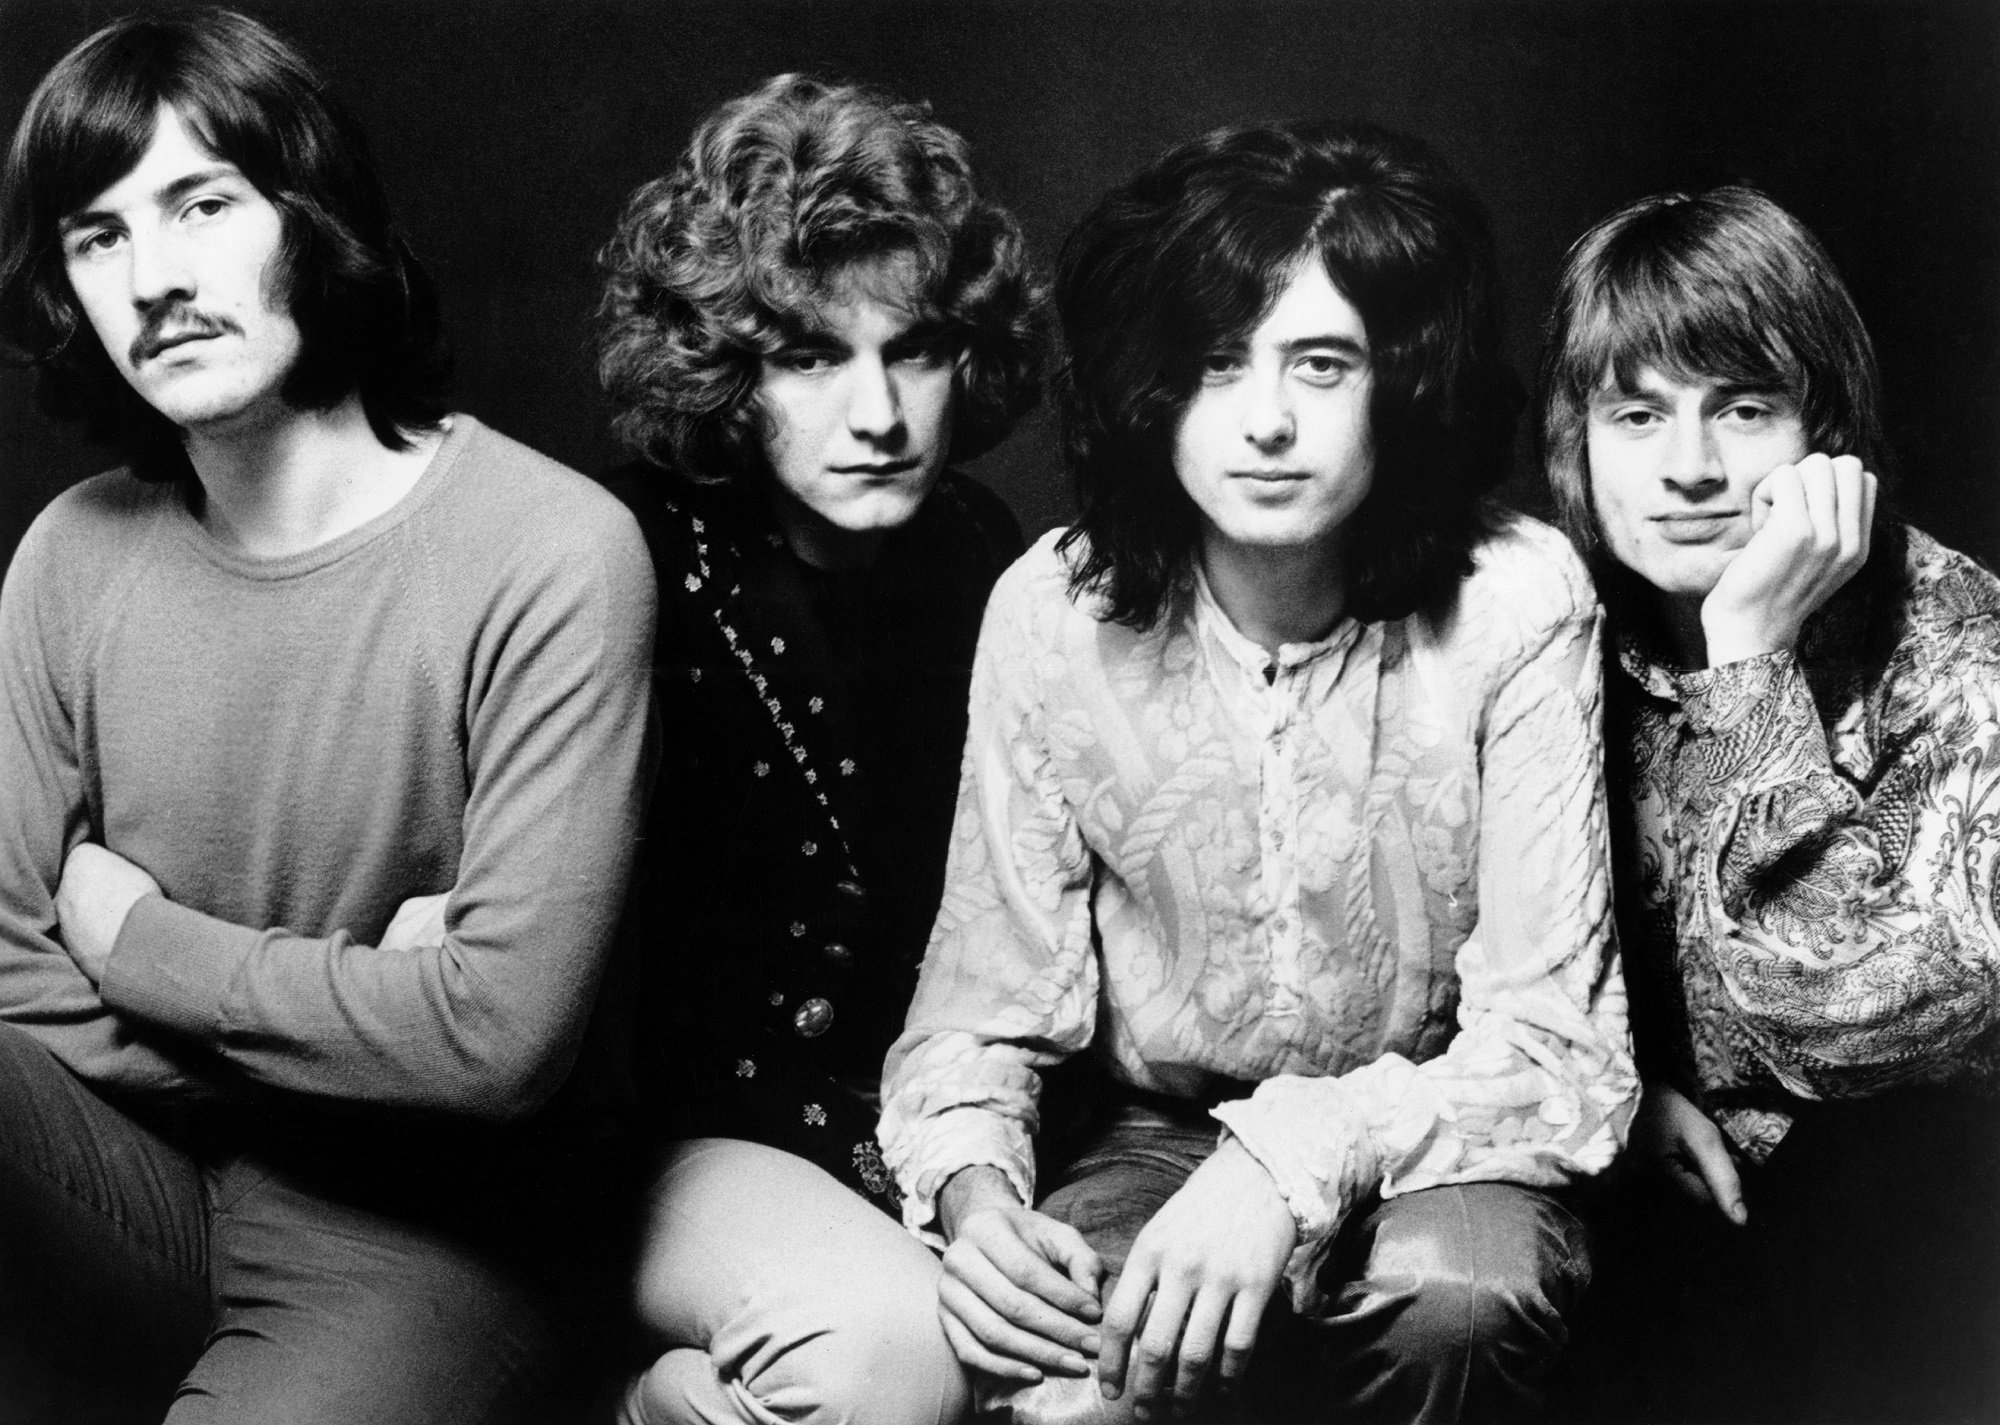 A black-and-white photo of Led Zeppelin